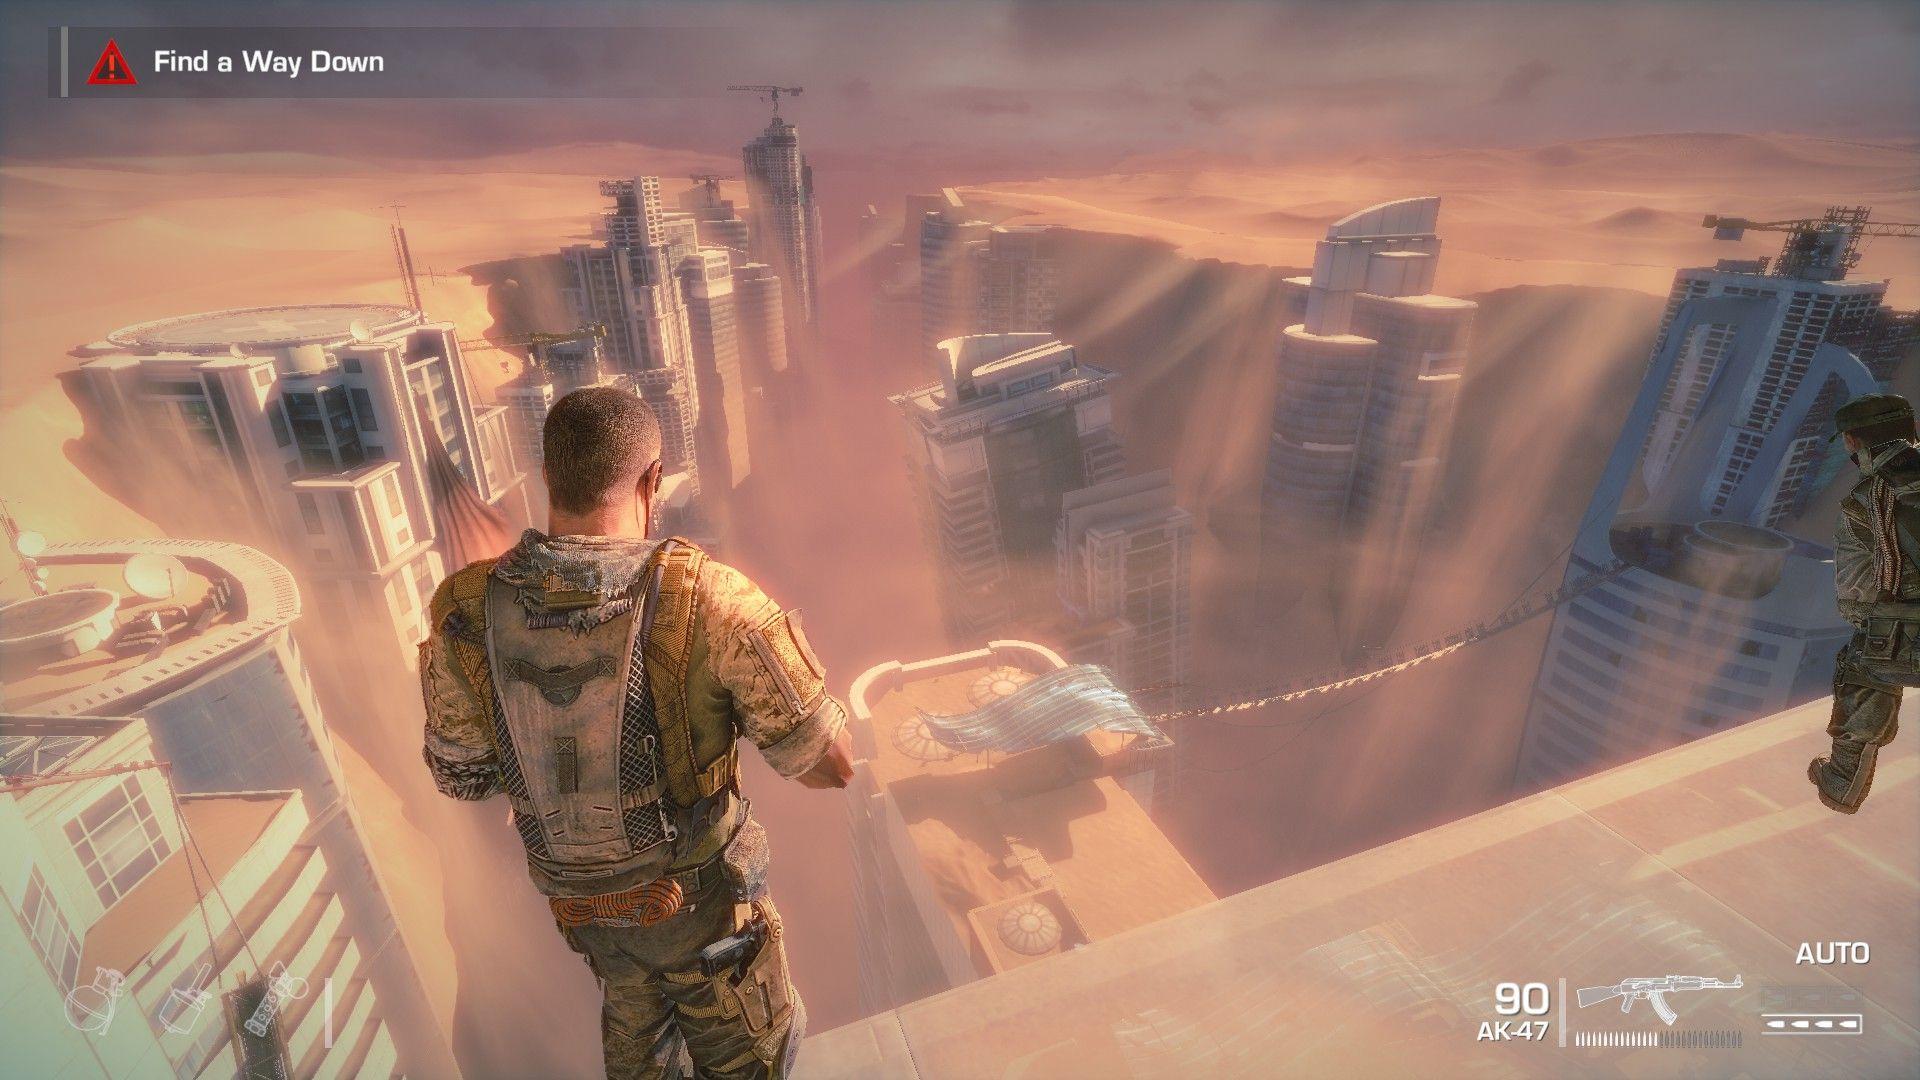 1920x1080px 337.24 KB Spec Ops The Line